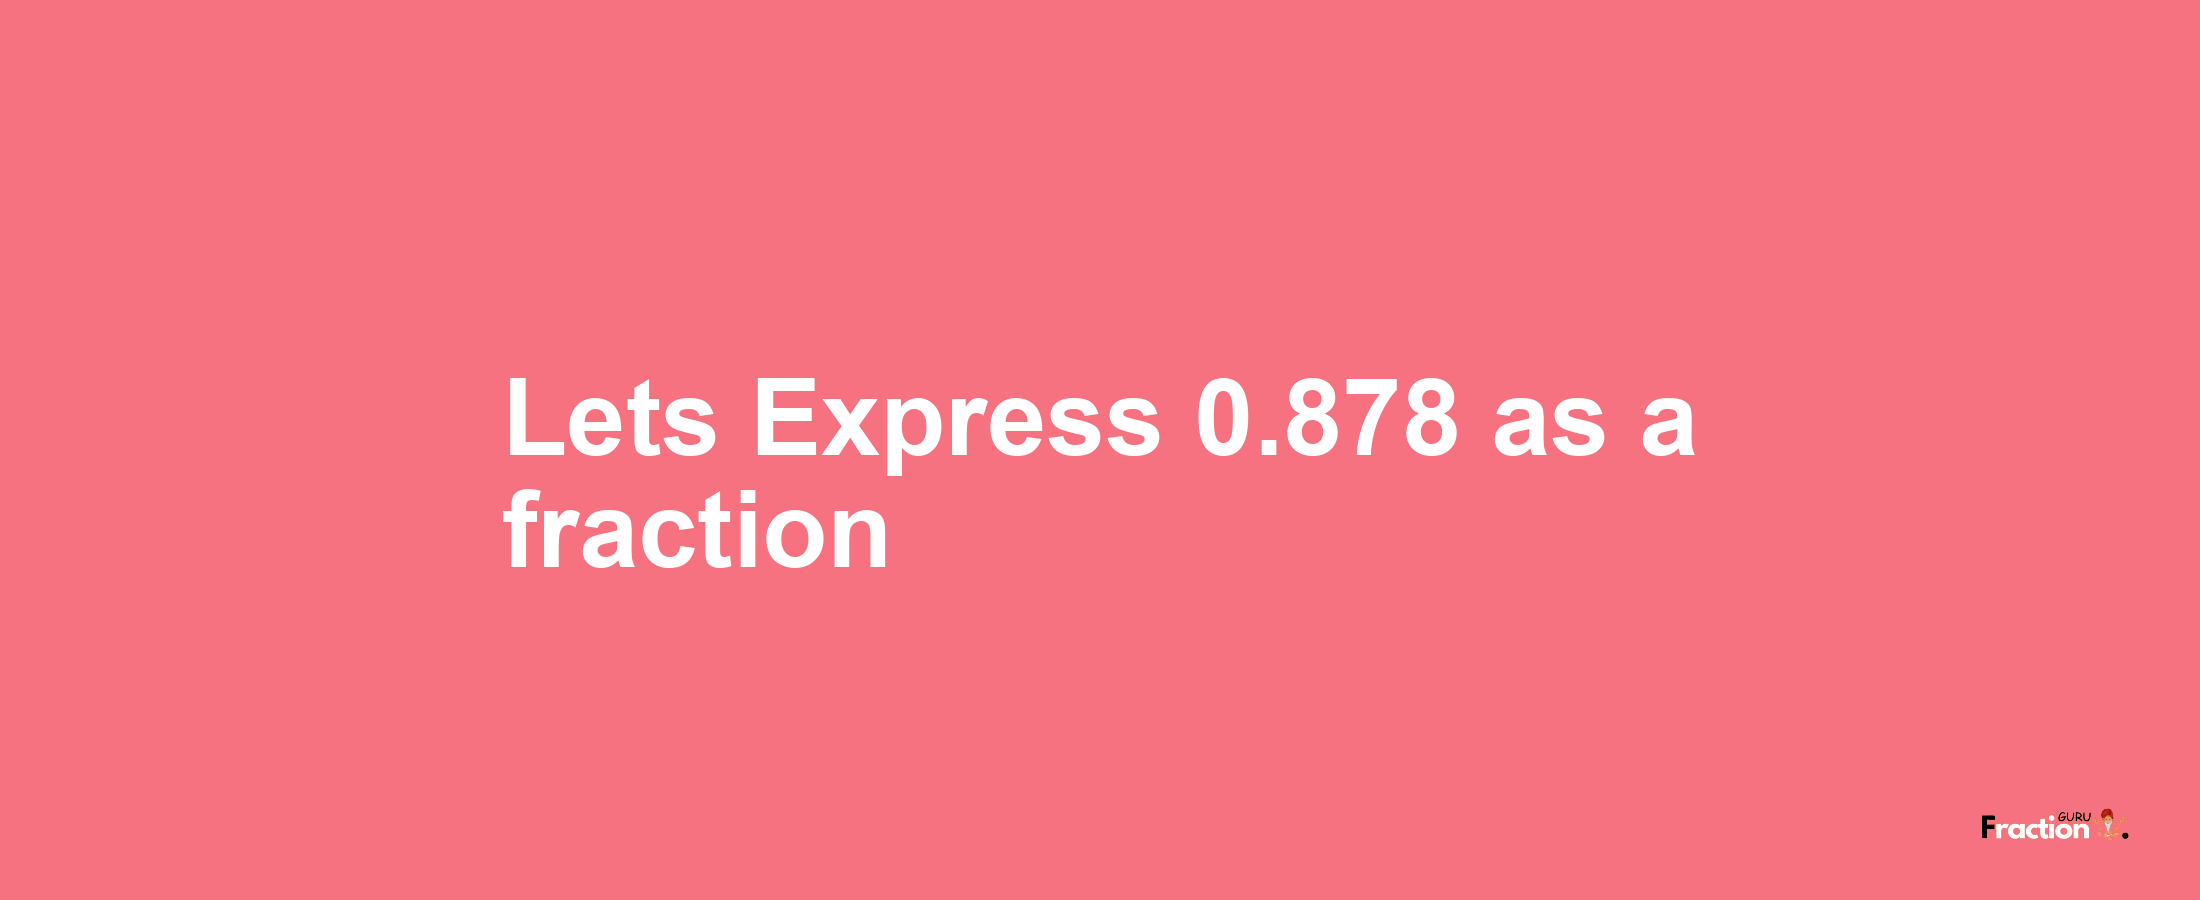 Lets Express 0.878 as afraction